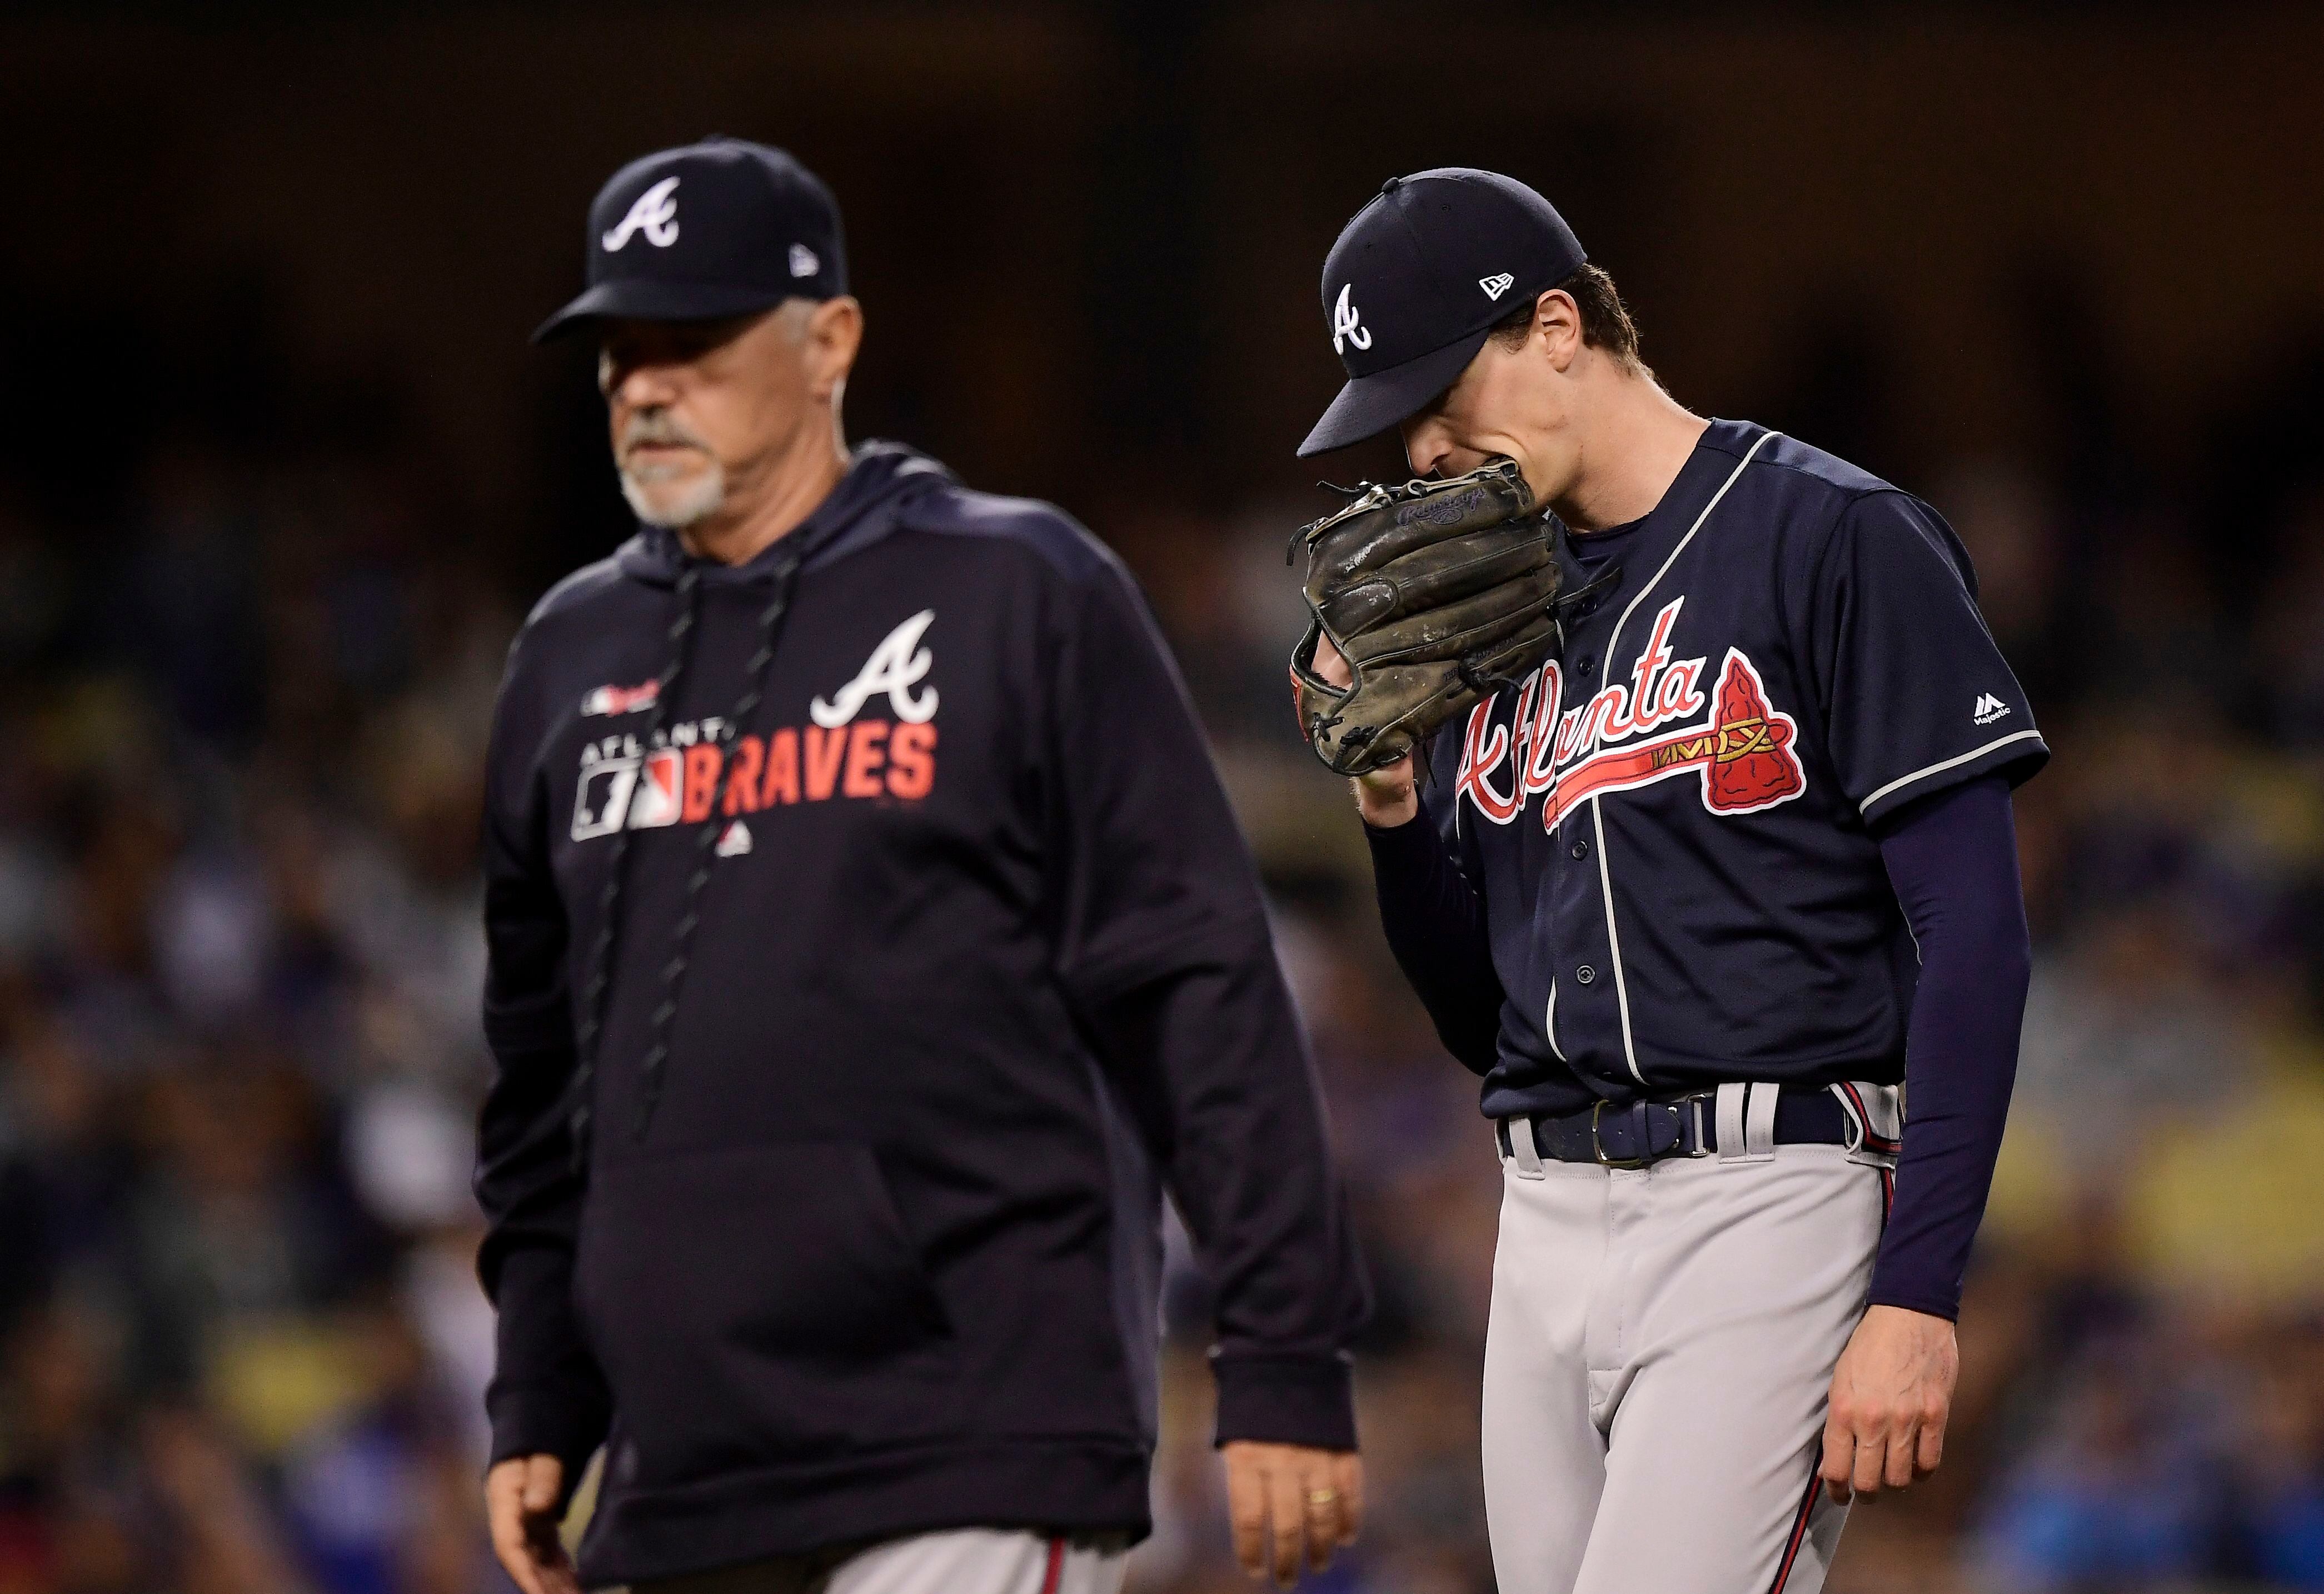 On night he almost melted, Max Fried showed why Braves need him in October  - The Athletic